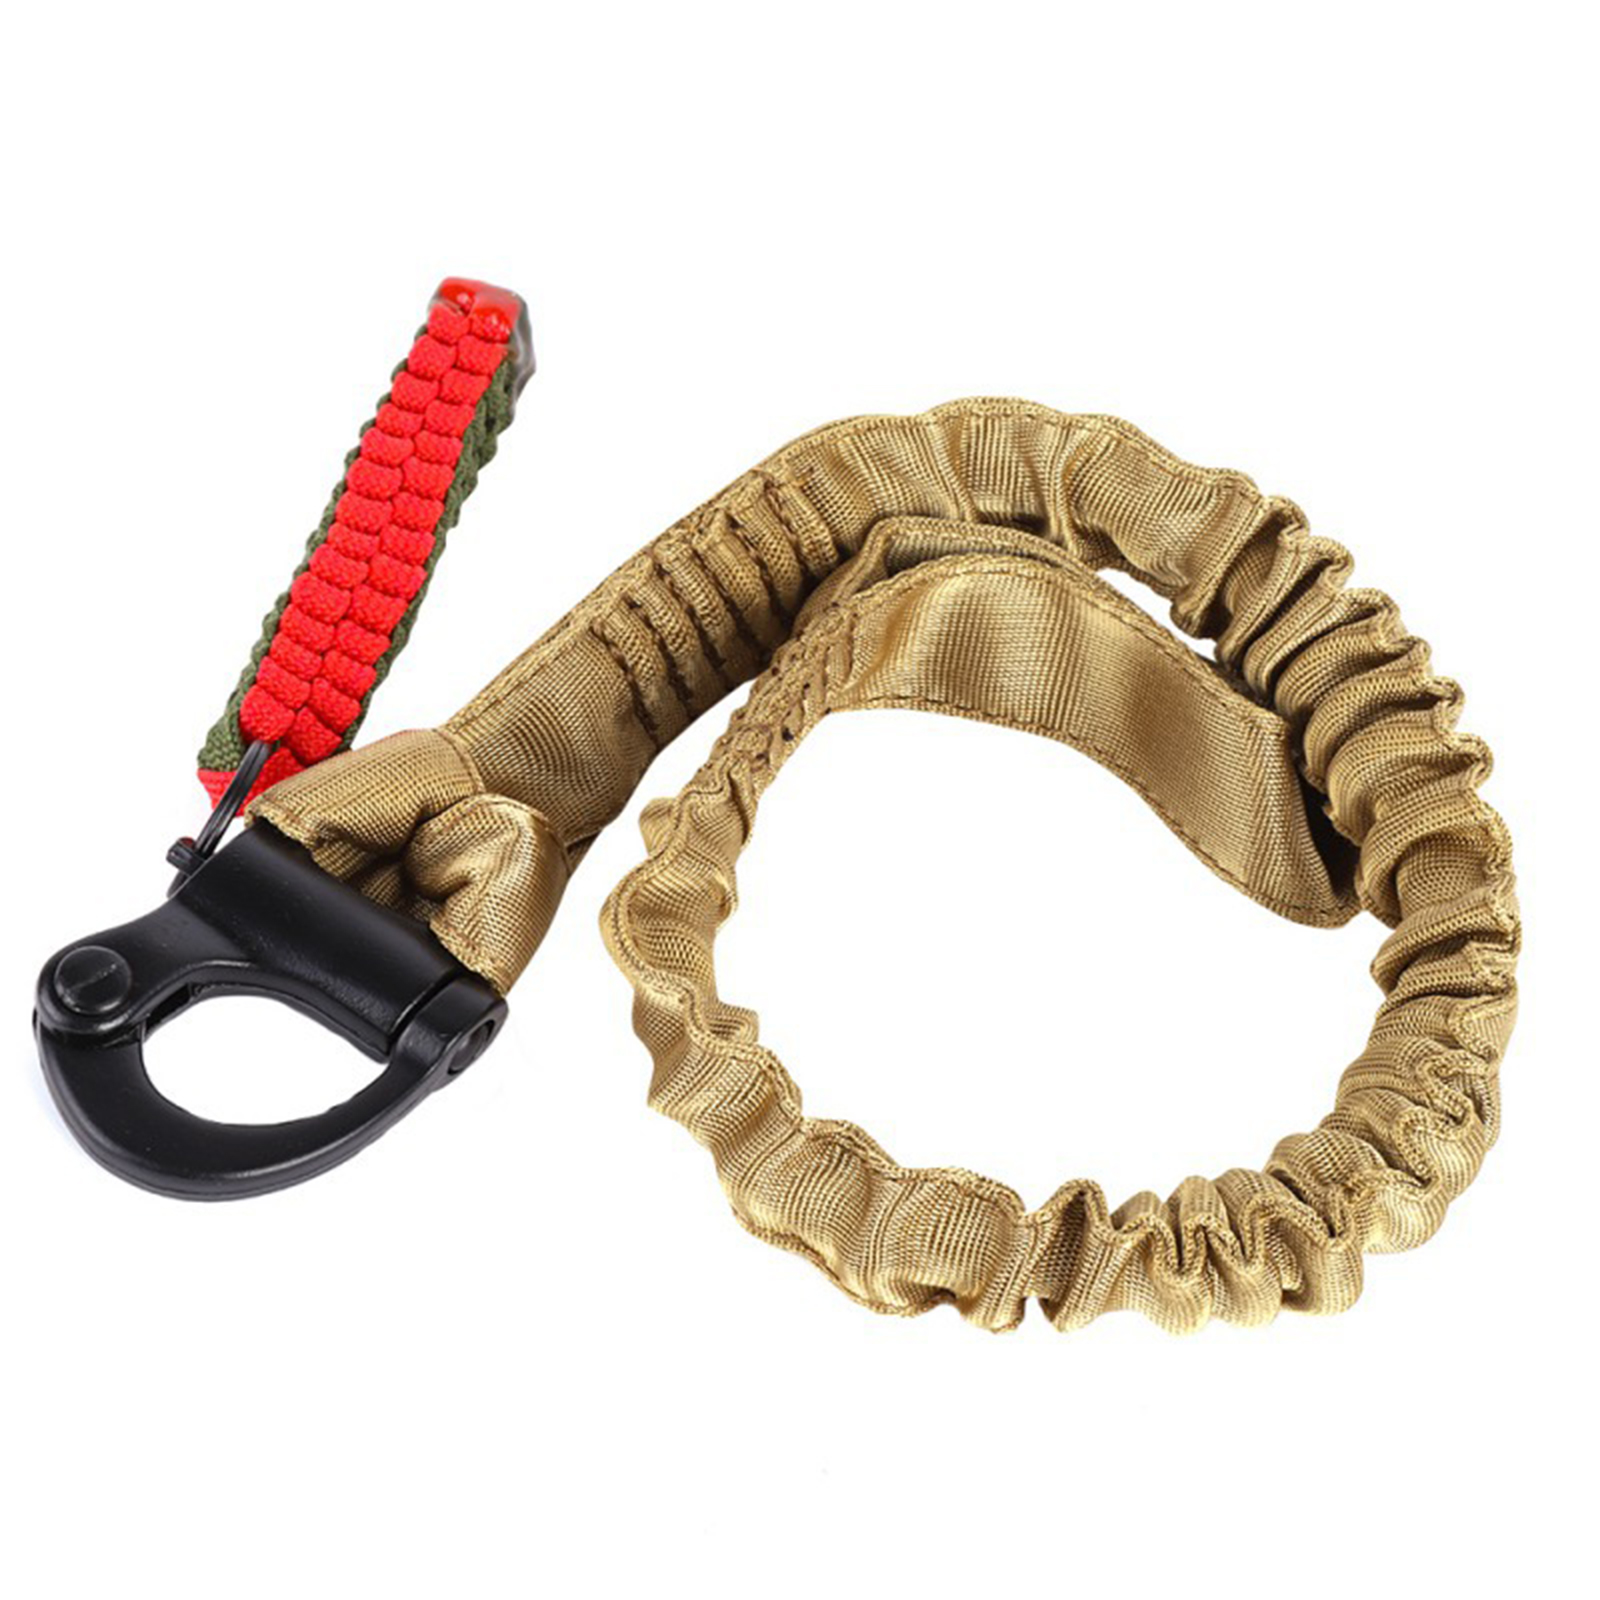 Outdoor Safety Rope Multifunctional Quick Release Survival Kit For Outdoor Sports Aerial Work Hiking